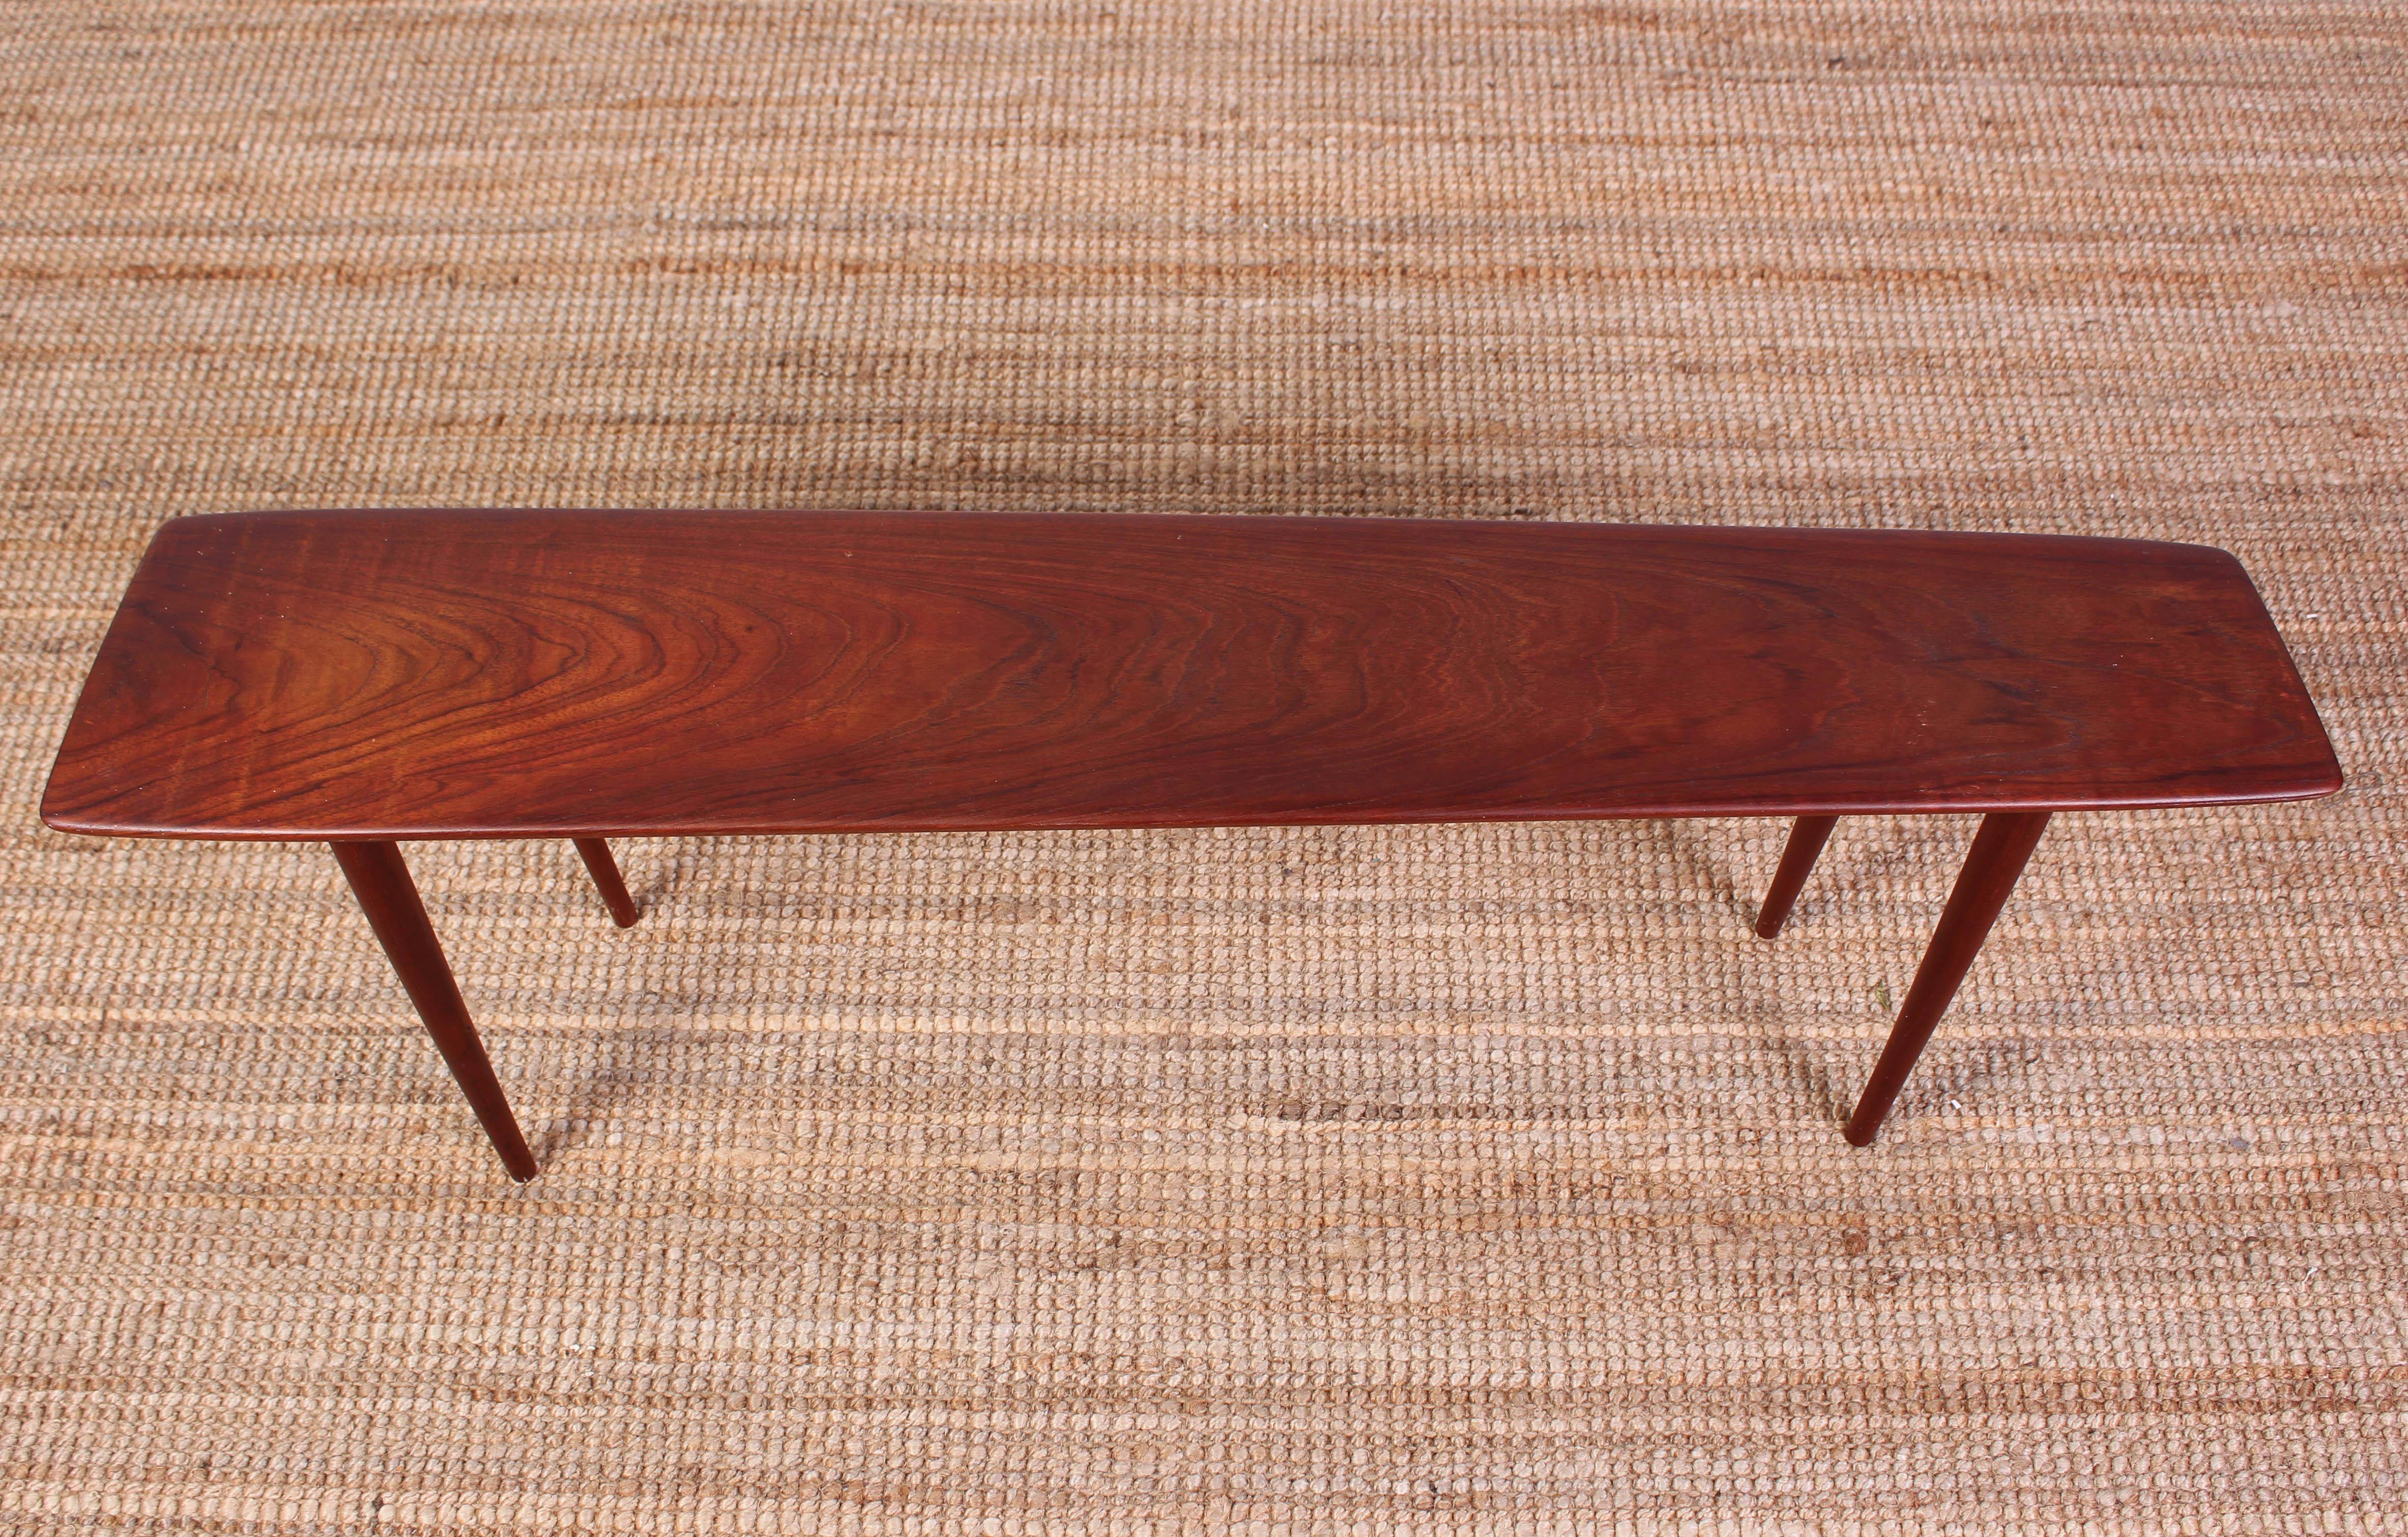 A midcentury Danish teak bench. The bench I made out of solid teak and two of the legs are adjustable.

Good vintage condition with signs of usage consistent with age and use.